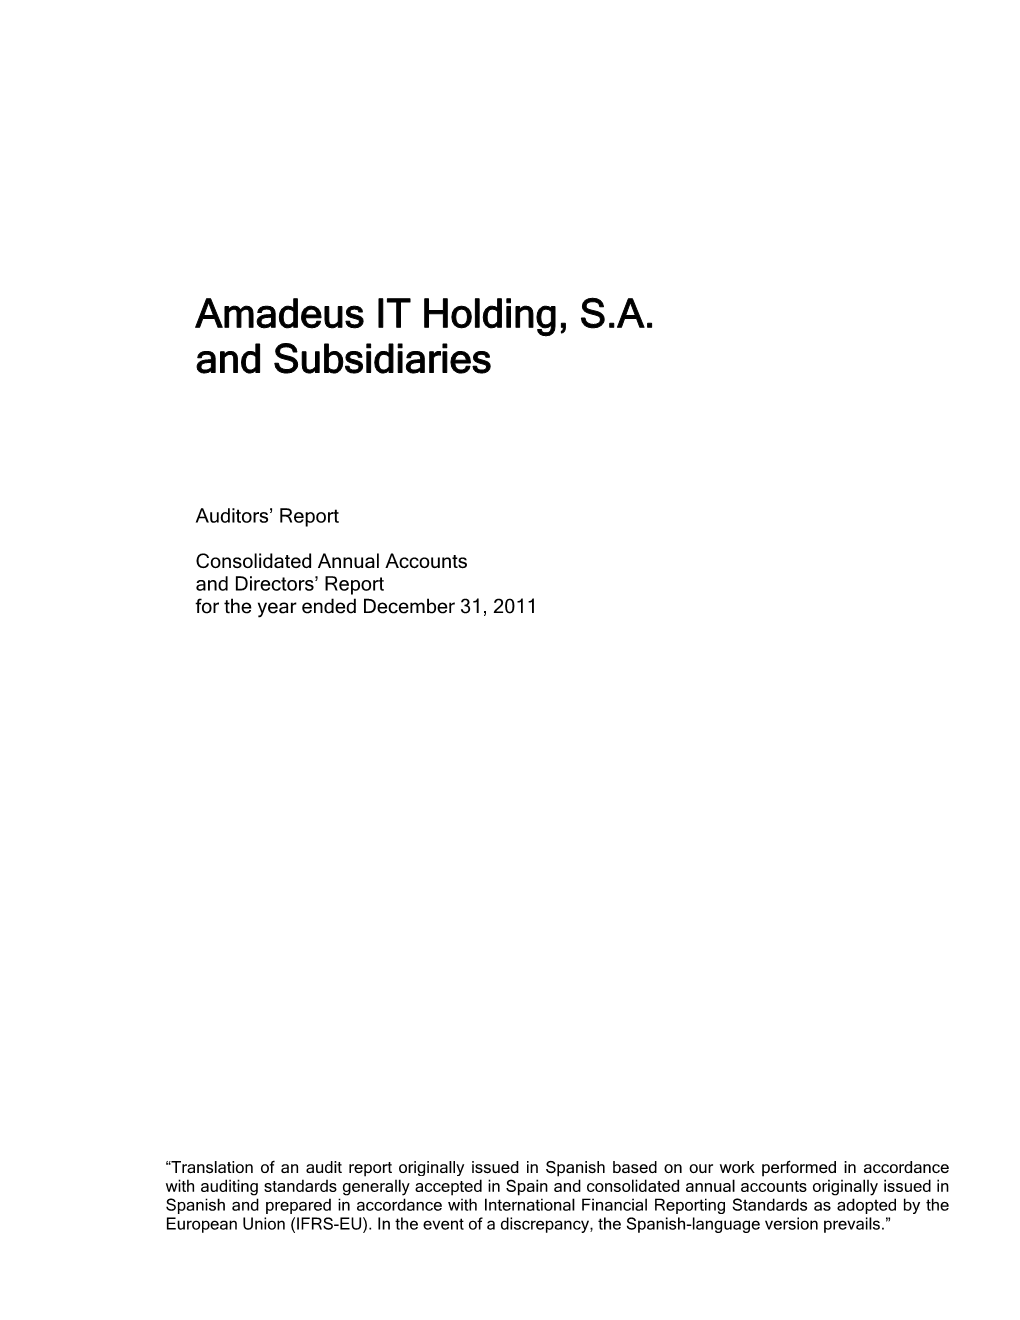 Amadeus IT Holding, S.A. and Subsidiaries